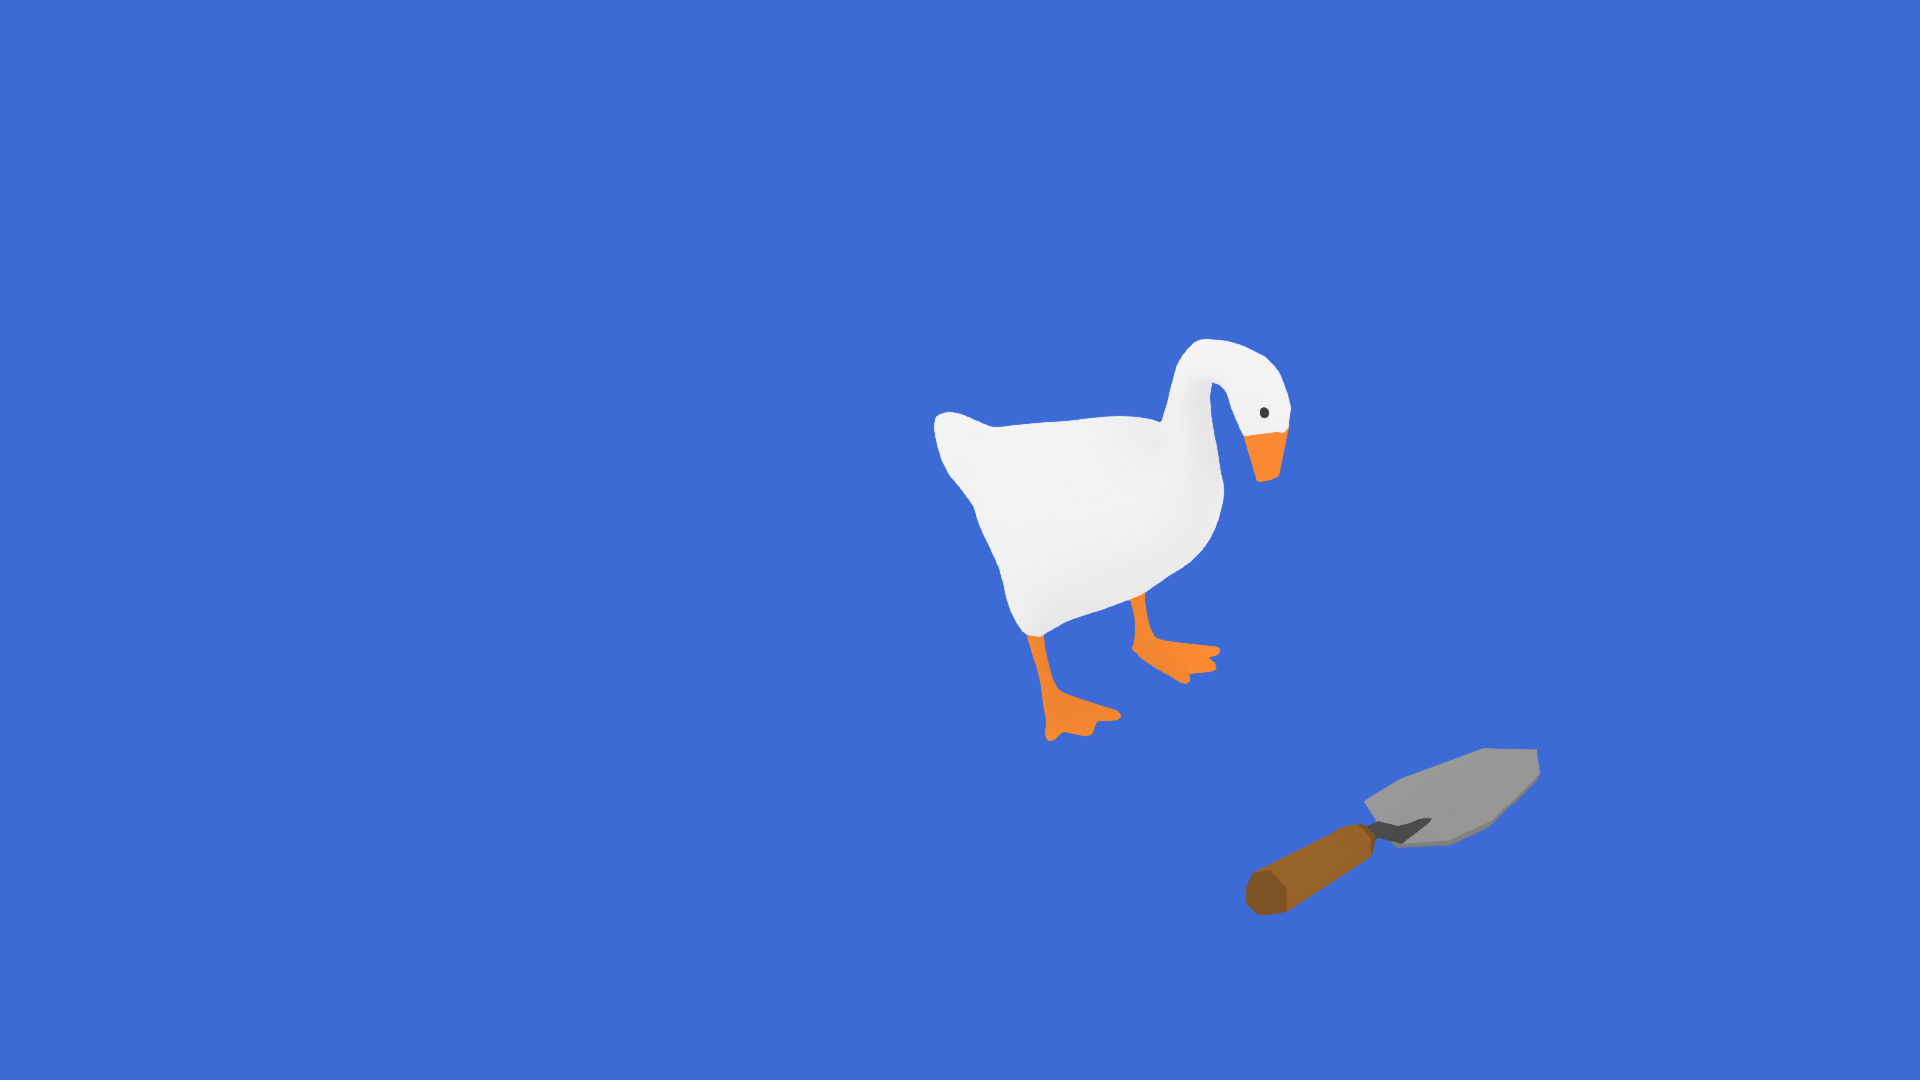 download goose game 2 for free